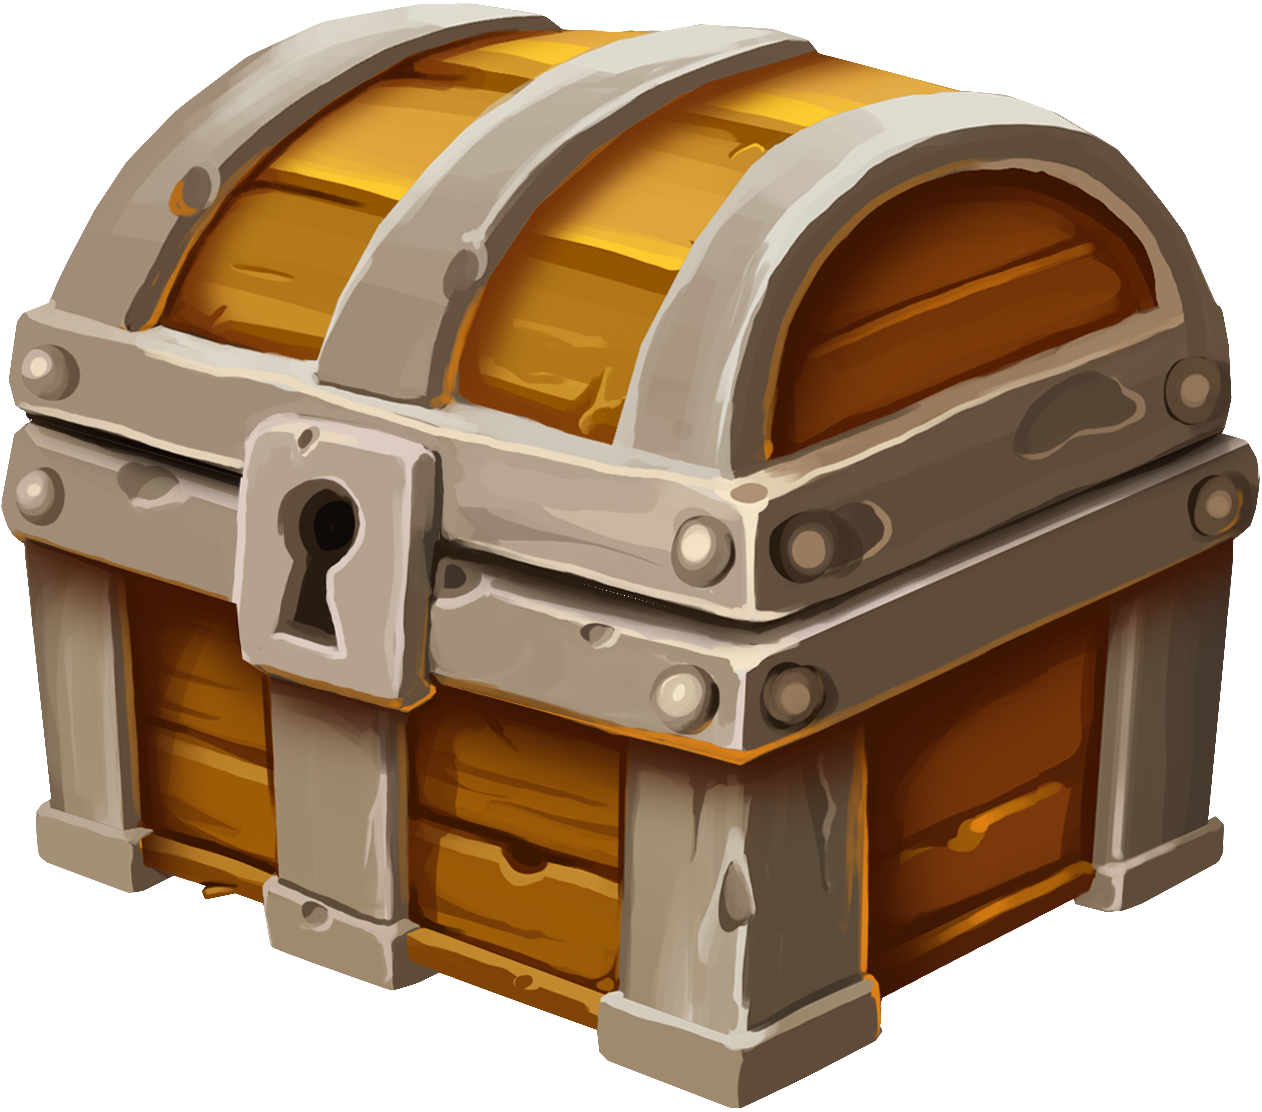 Wooden Treasure Chest PNG HD Quality